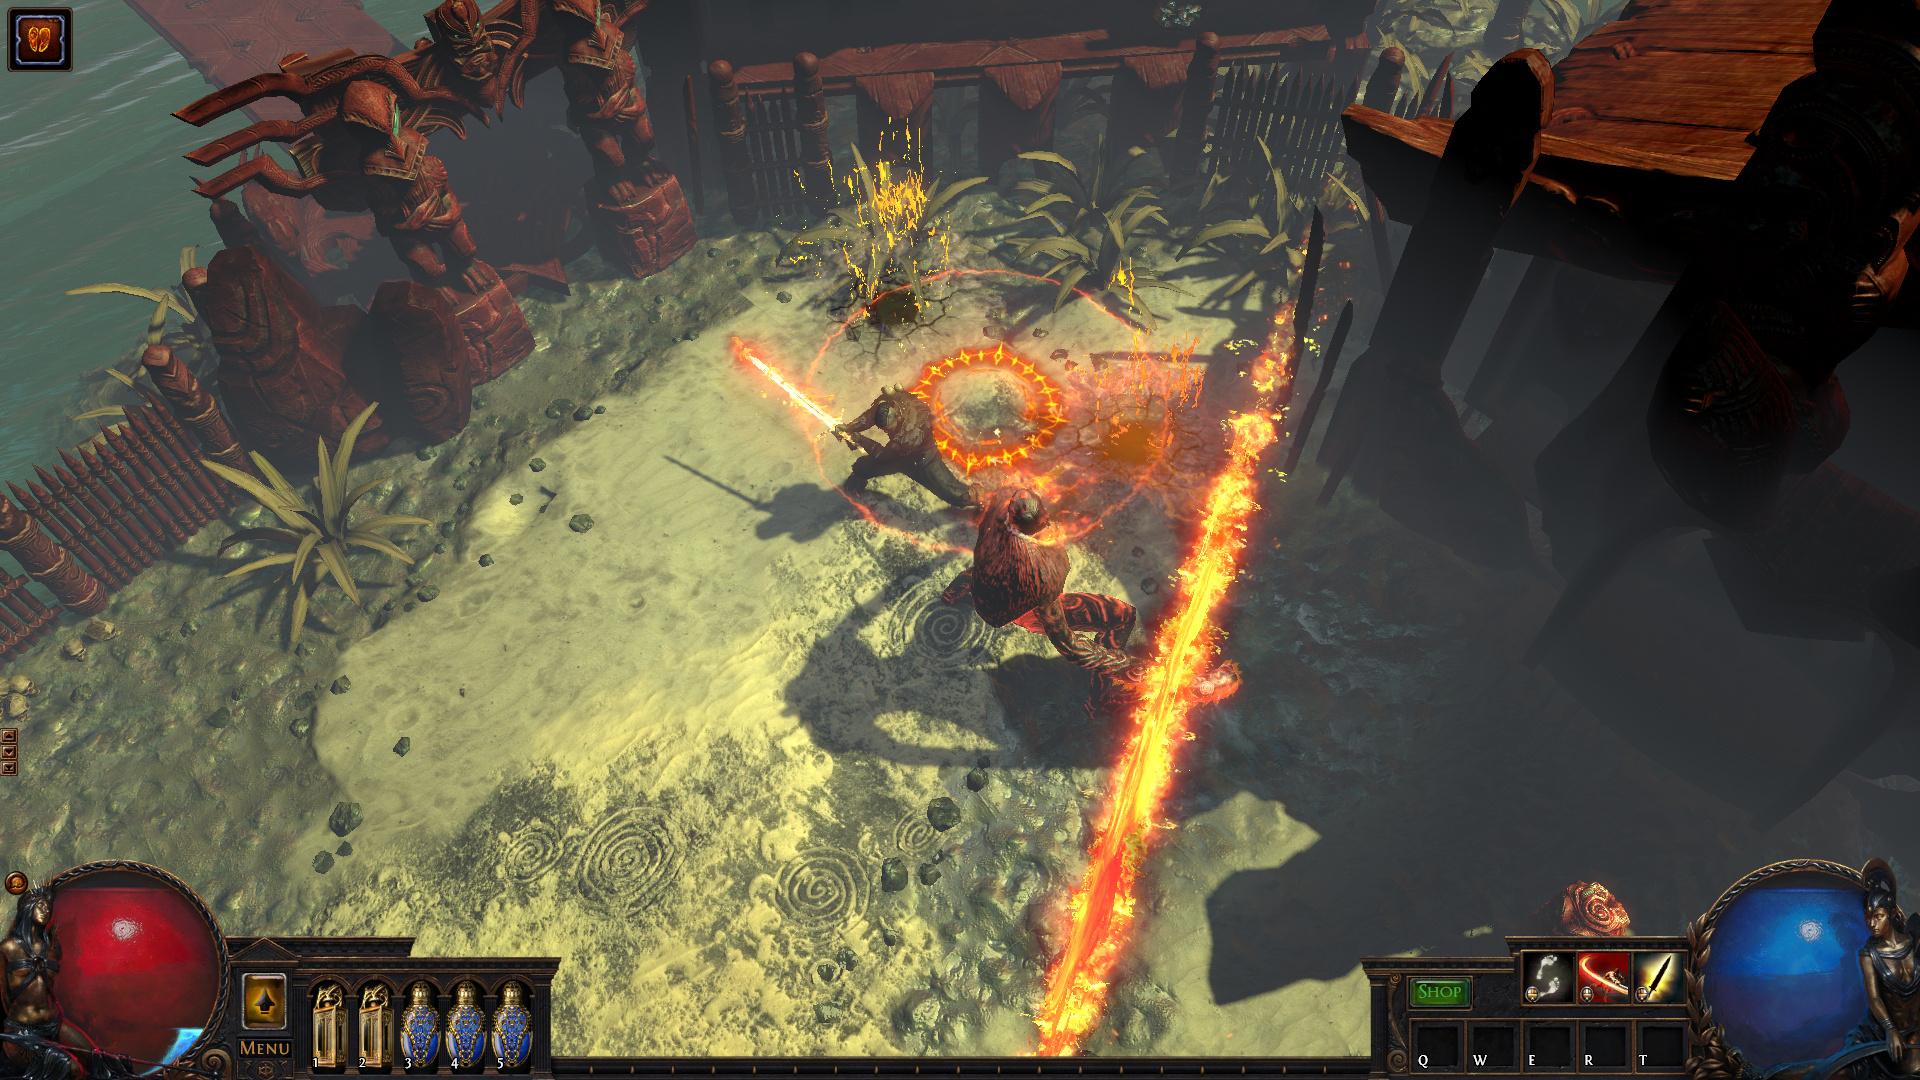 Screenshot №45 from game Path of Exile